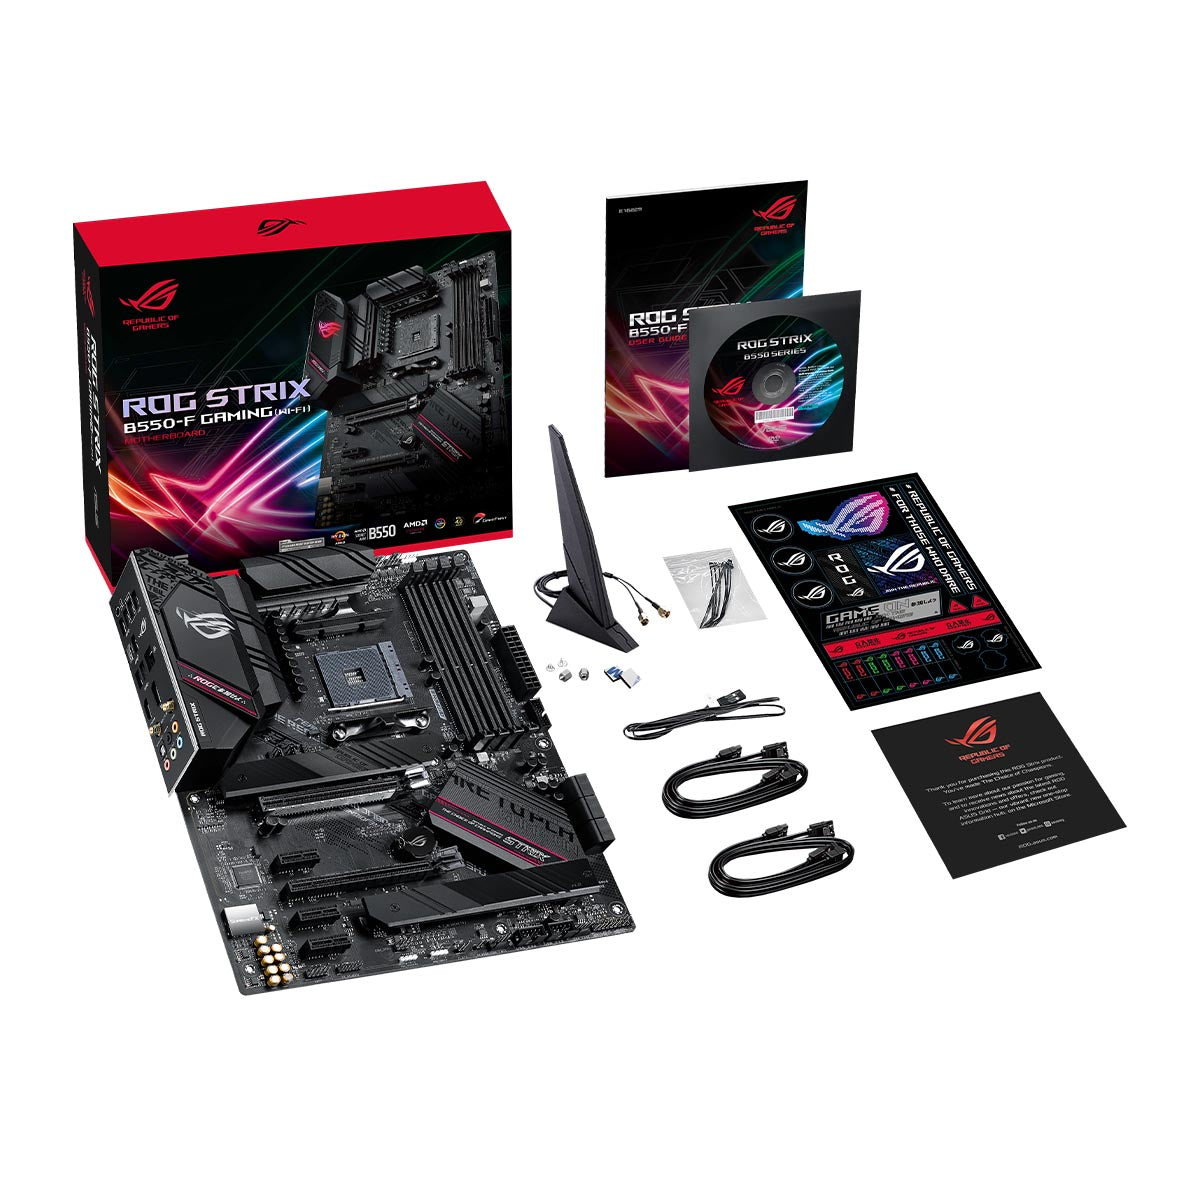 ASUS ROG STRIX B550-F AMD AM4 ATX Gaming WIFI Motherboard with PCIe 4.0 and AI Networking